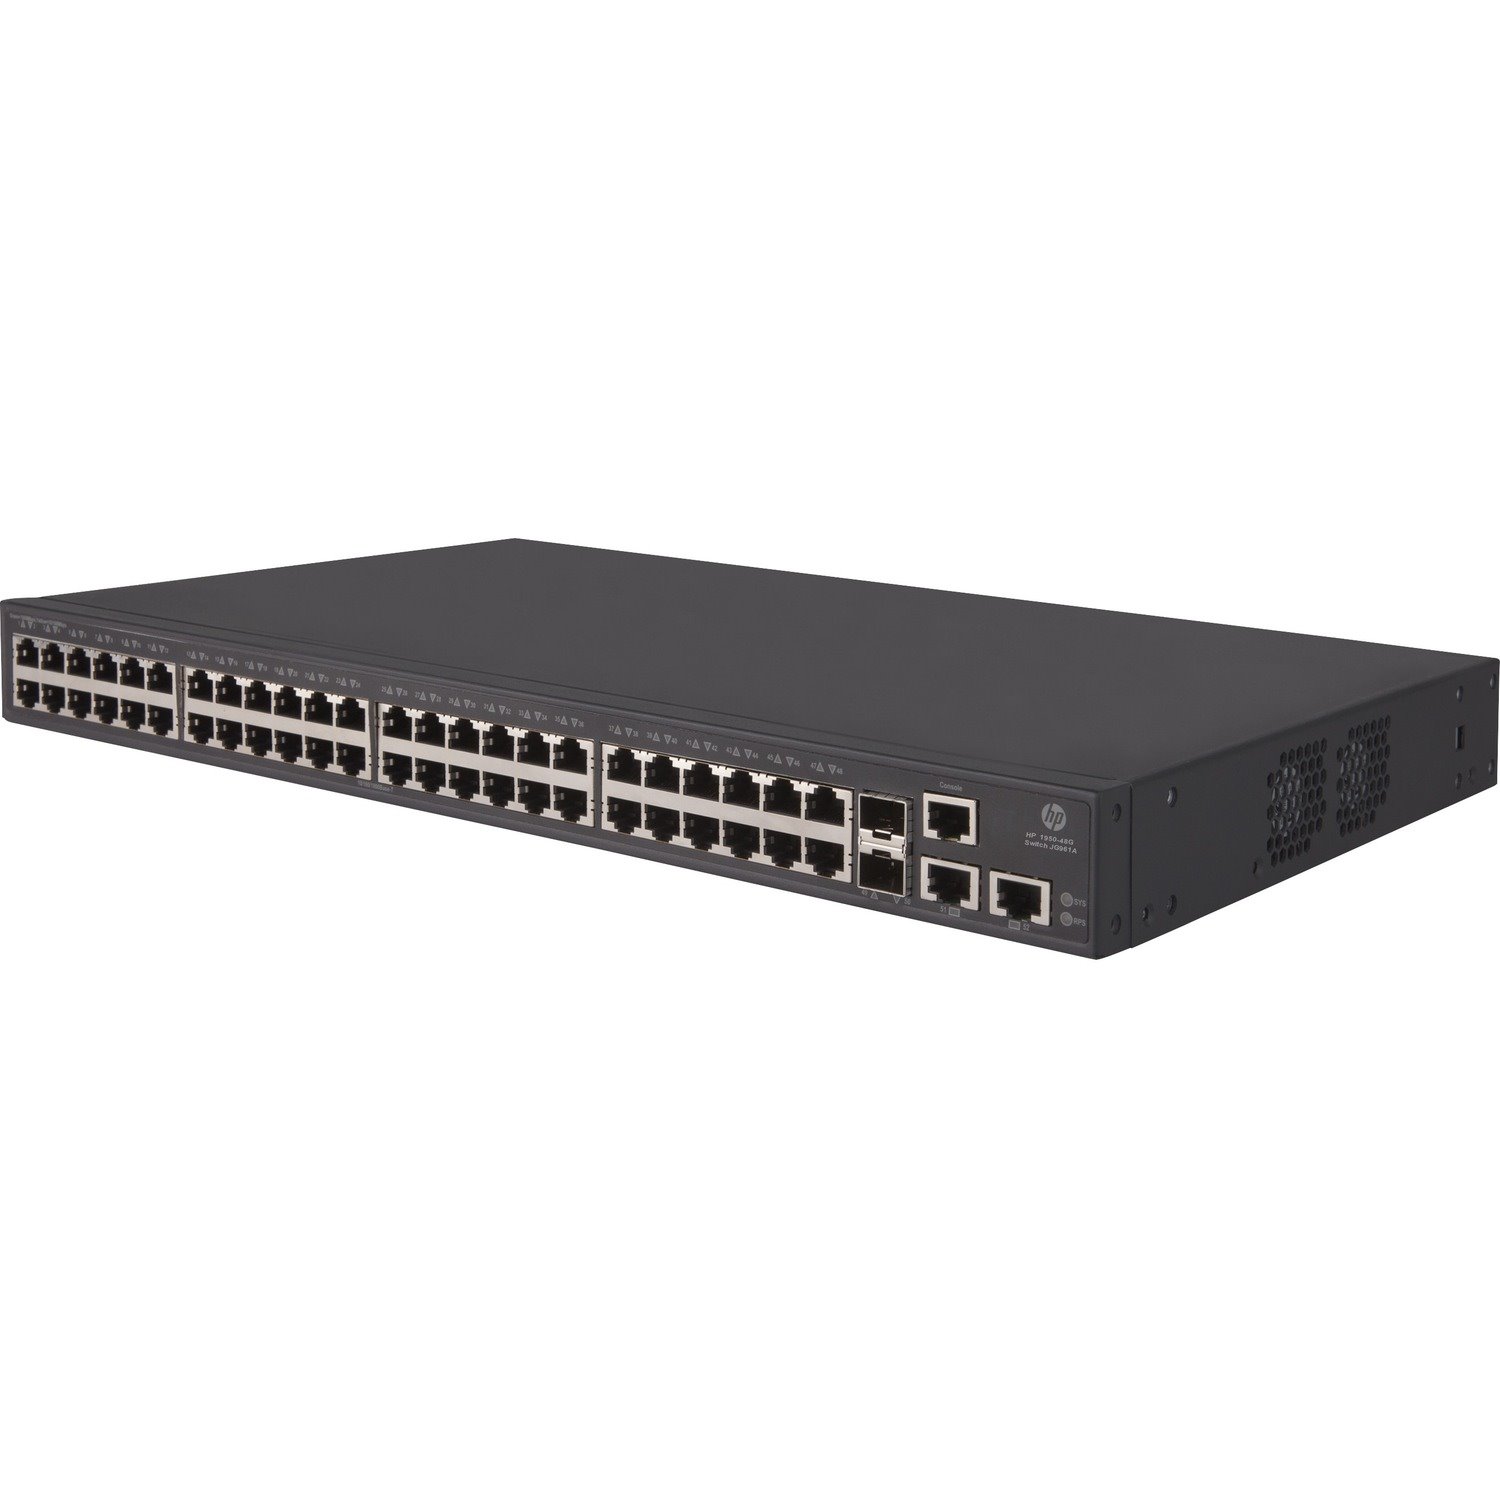 HPE 1950 1950-48G- 2SFP+-2XGT 50 Ports Manageable Ethernet Switch - Gigabit Ethernet, 10 Gigabit Ethernet - 10/100Base-TX, 10/100/1000Base-T, 10GBase-T, 10GBase-X